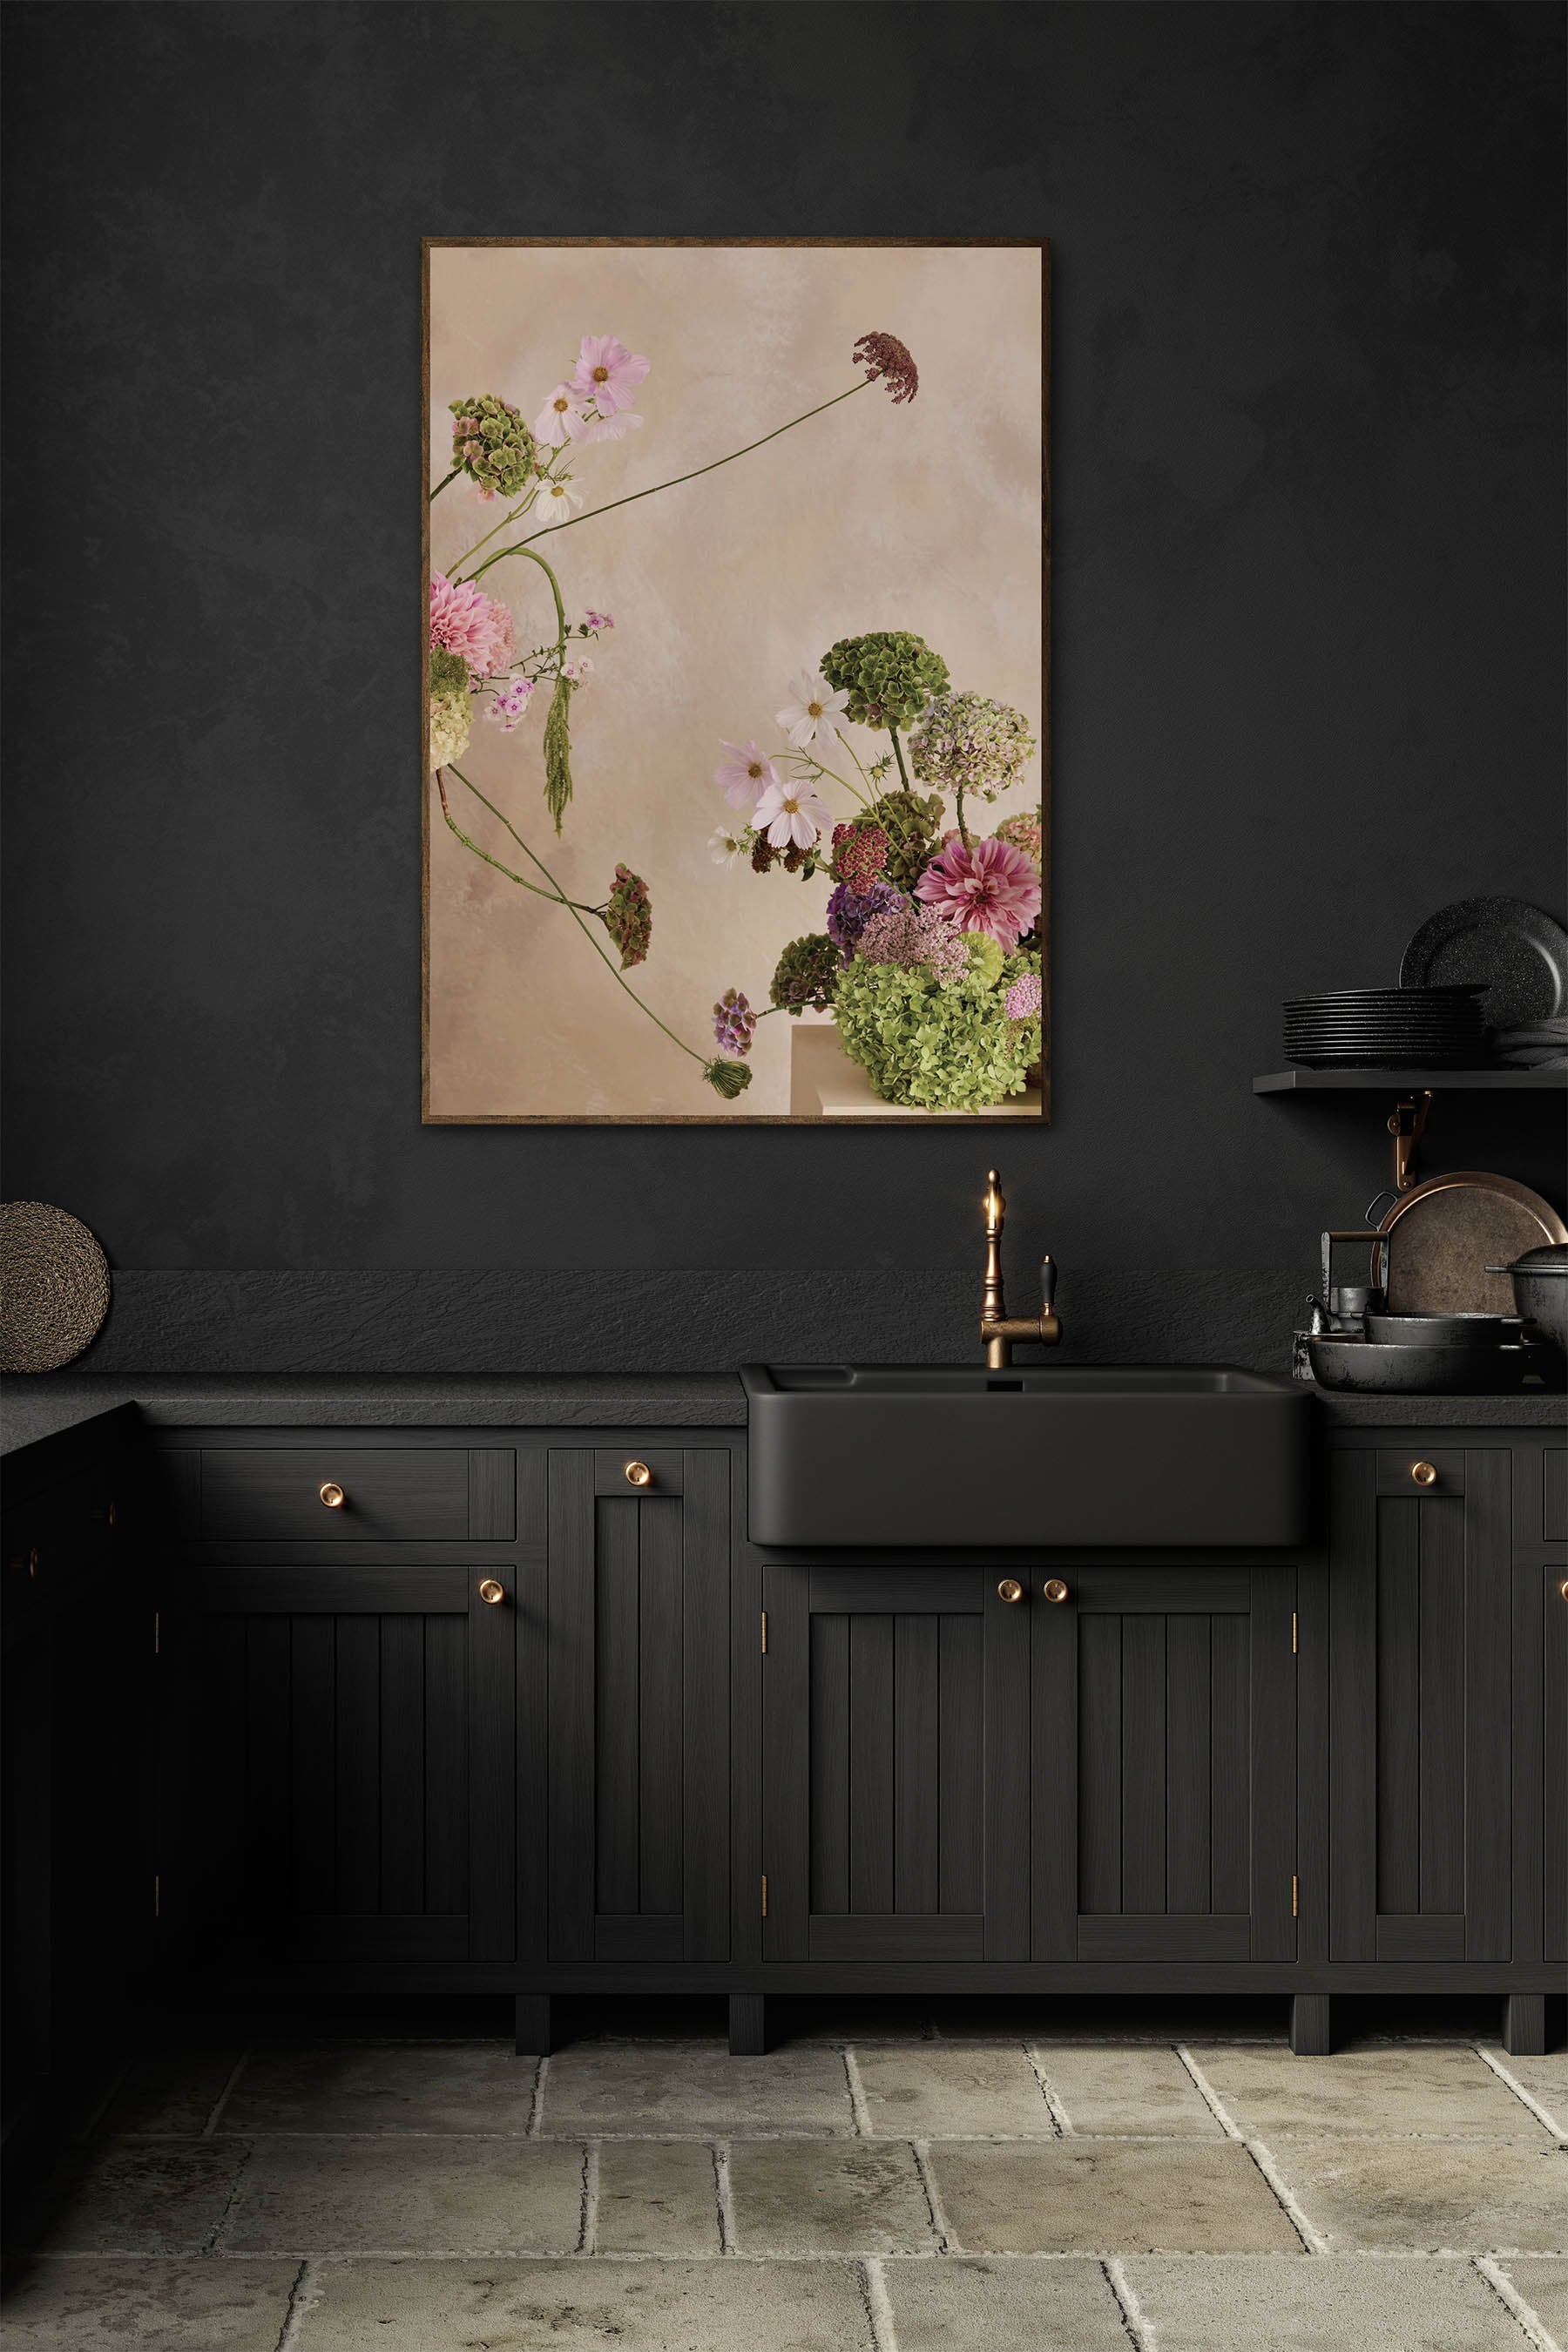 Whimsical Floral Abstract Arrangement against a Linen colour hand painted background Fine Art Print By Austin Bloom in a dark modern farmhouse kitchen.